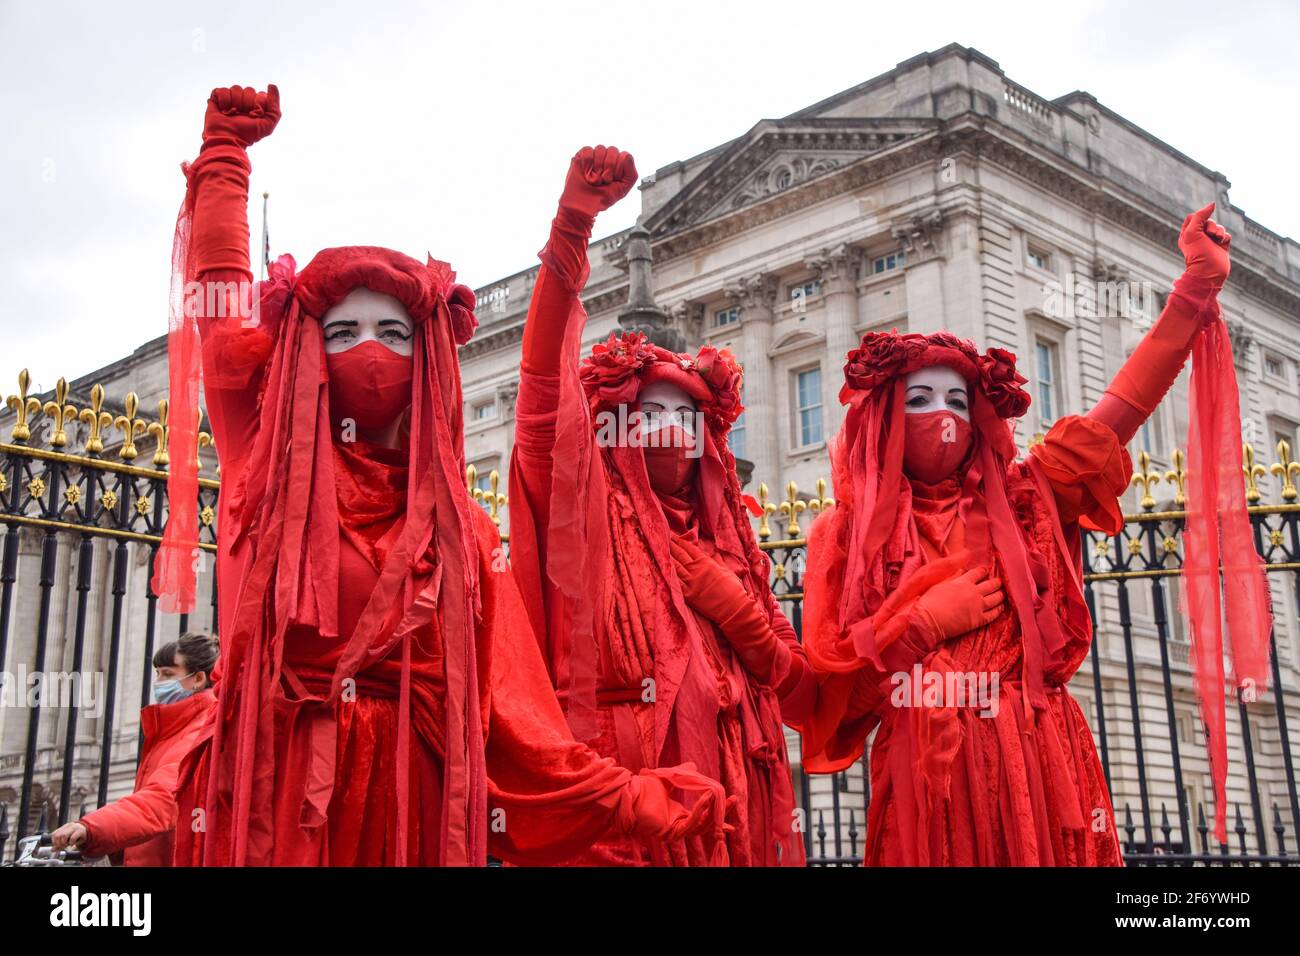 London, United Kingdom. 3rd April 2021. Extinction Rebellion's Red Rebel Brigade at the Kill The Bill protest outside Buckingham Palace. Stock Photo